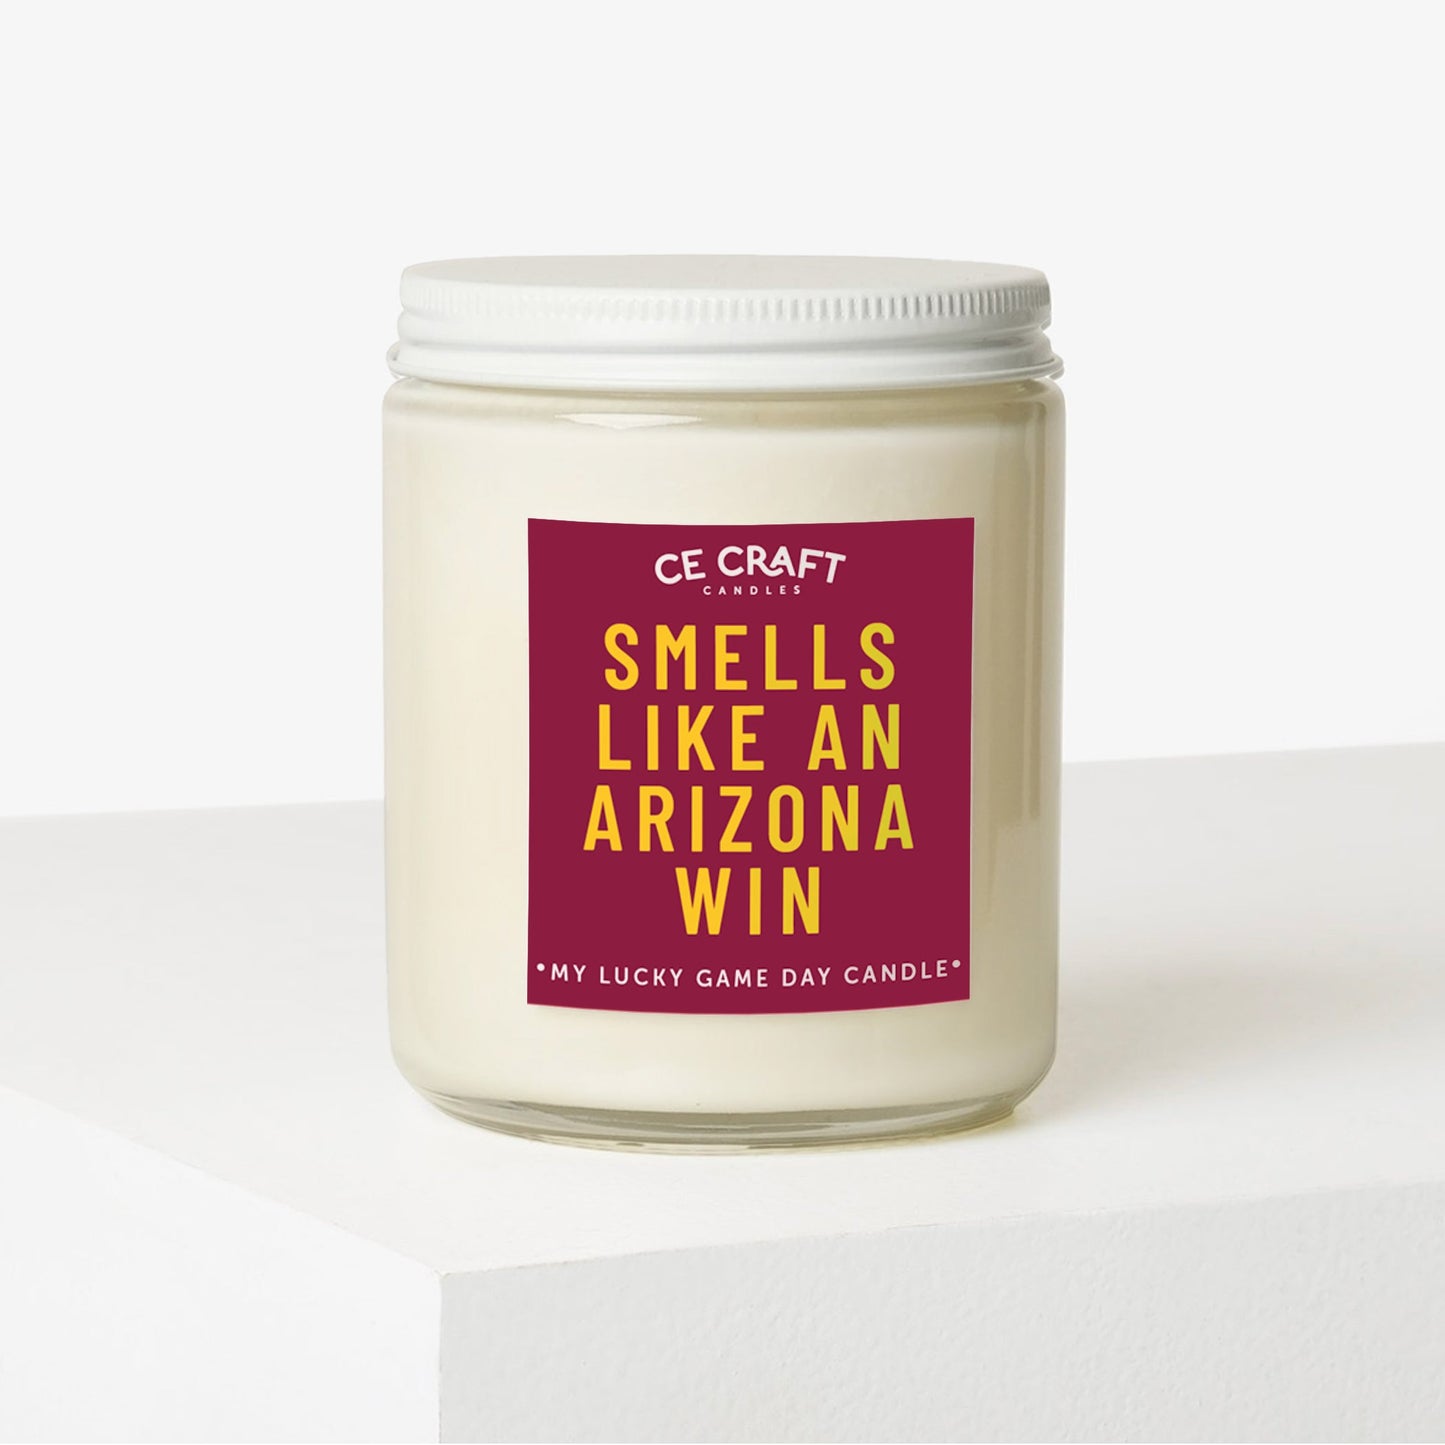 Smells Like an Arizona Win Scented Candle Candles CE Craft 